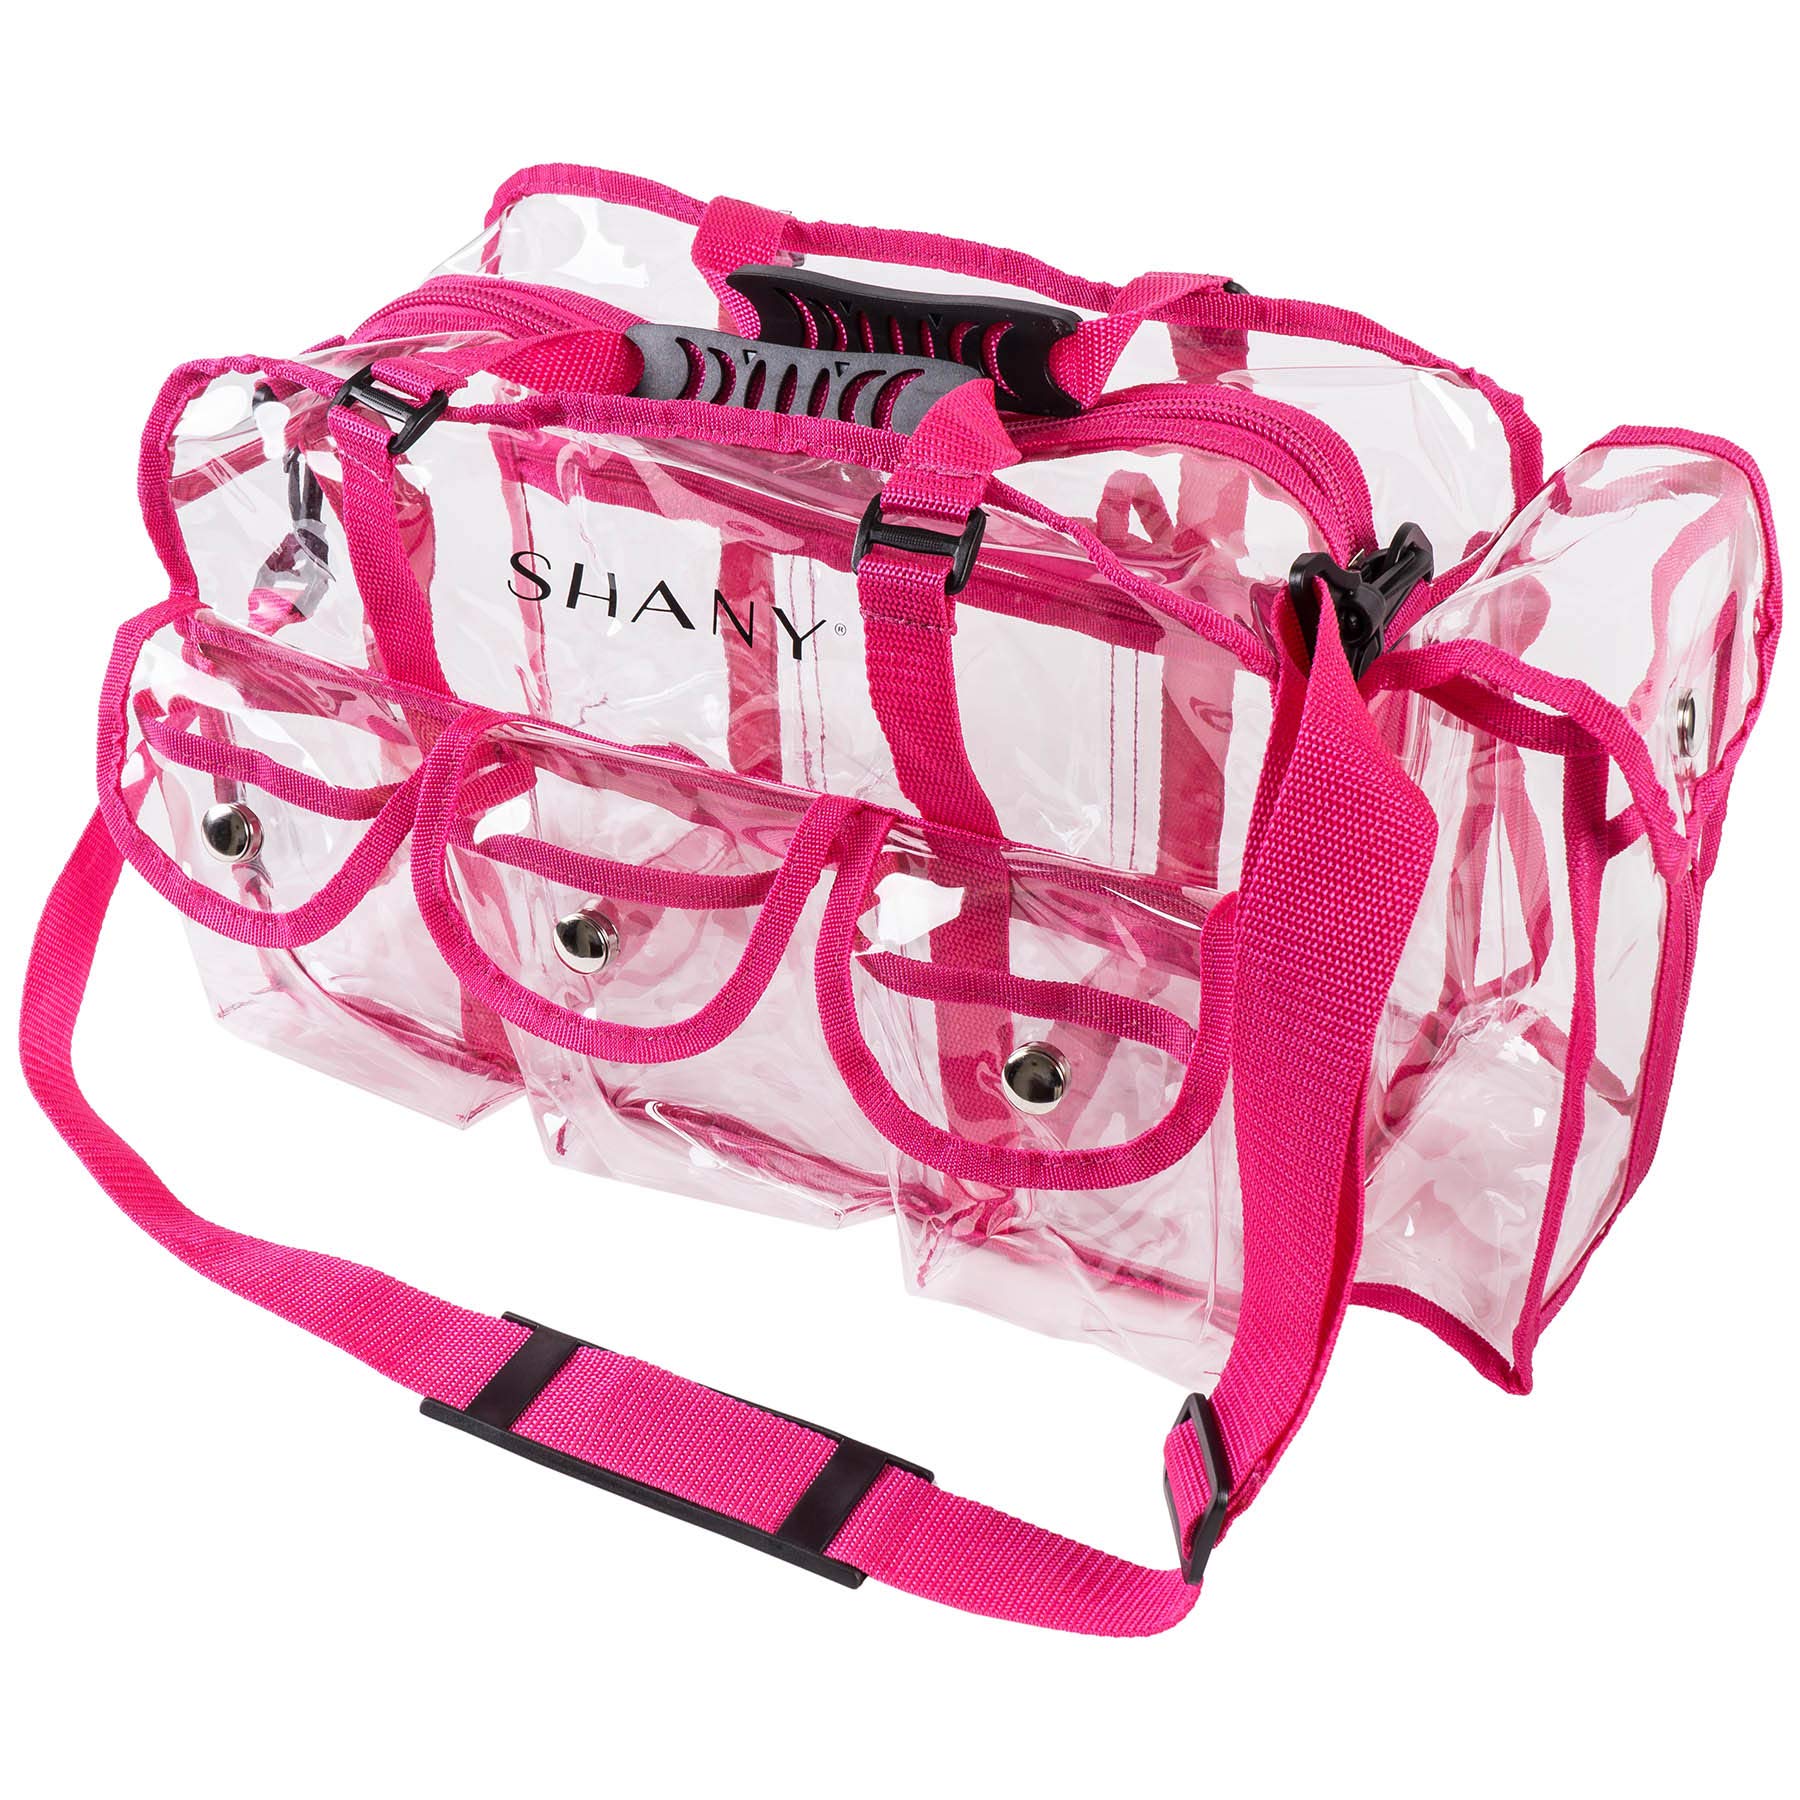 SHANY Clear PVC Makeup Bag - Large Professional Makeup Artist Rectangular Tote with Shoulder Strap and 5 External Pockets - PINK